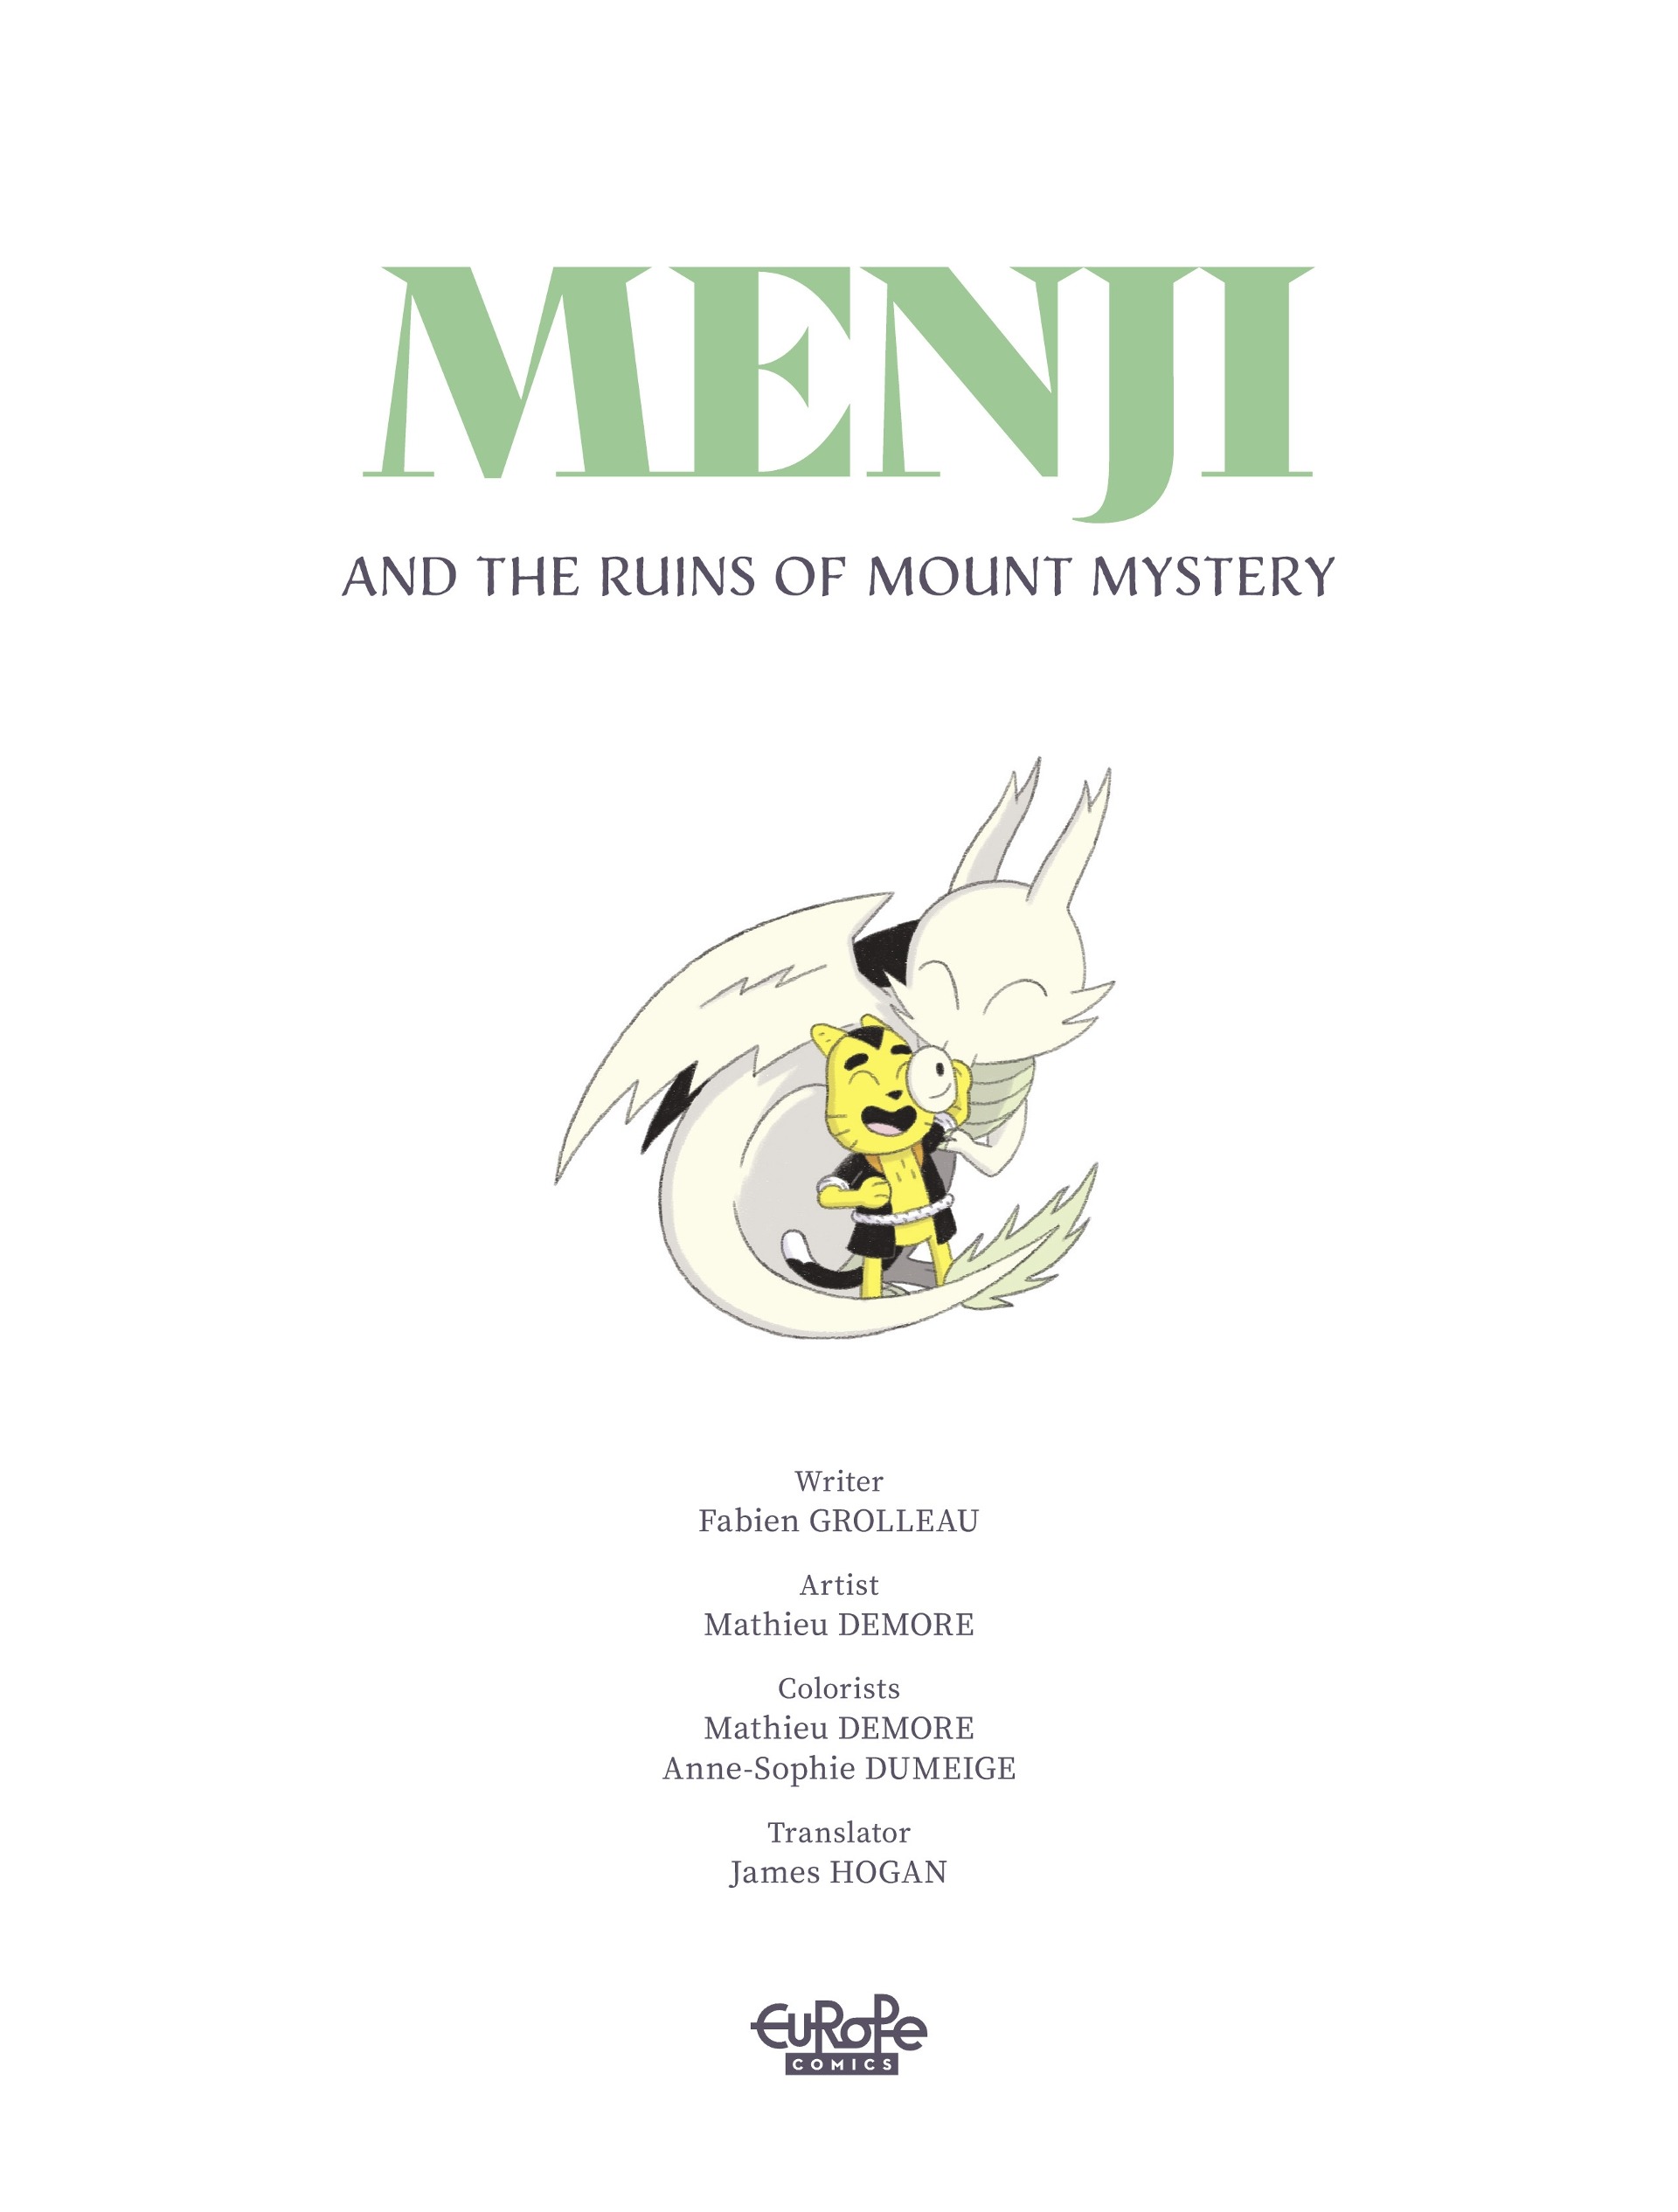 Read online Menji and the Ruins of Mount Mystery comic -  Issue # Full - 2